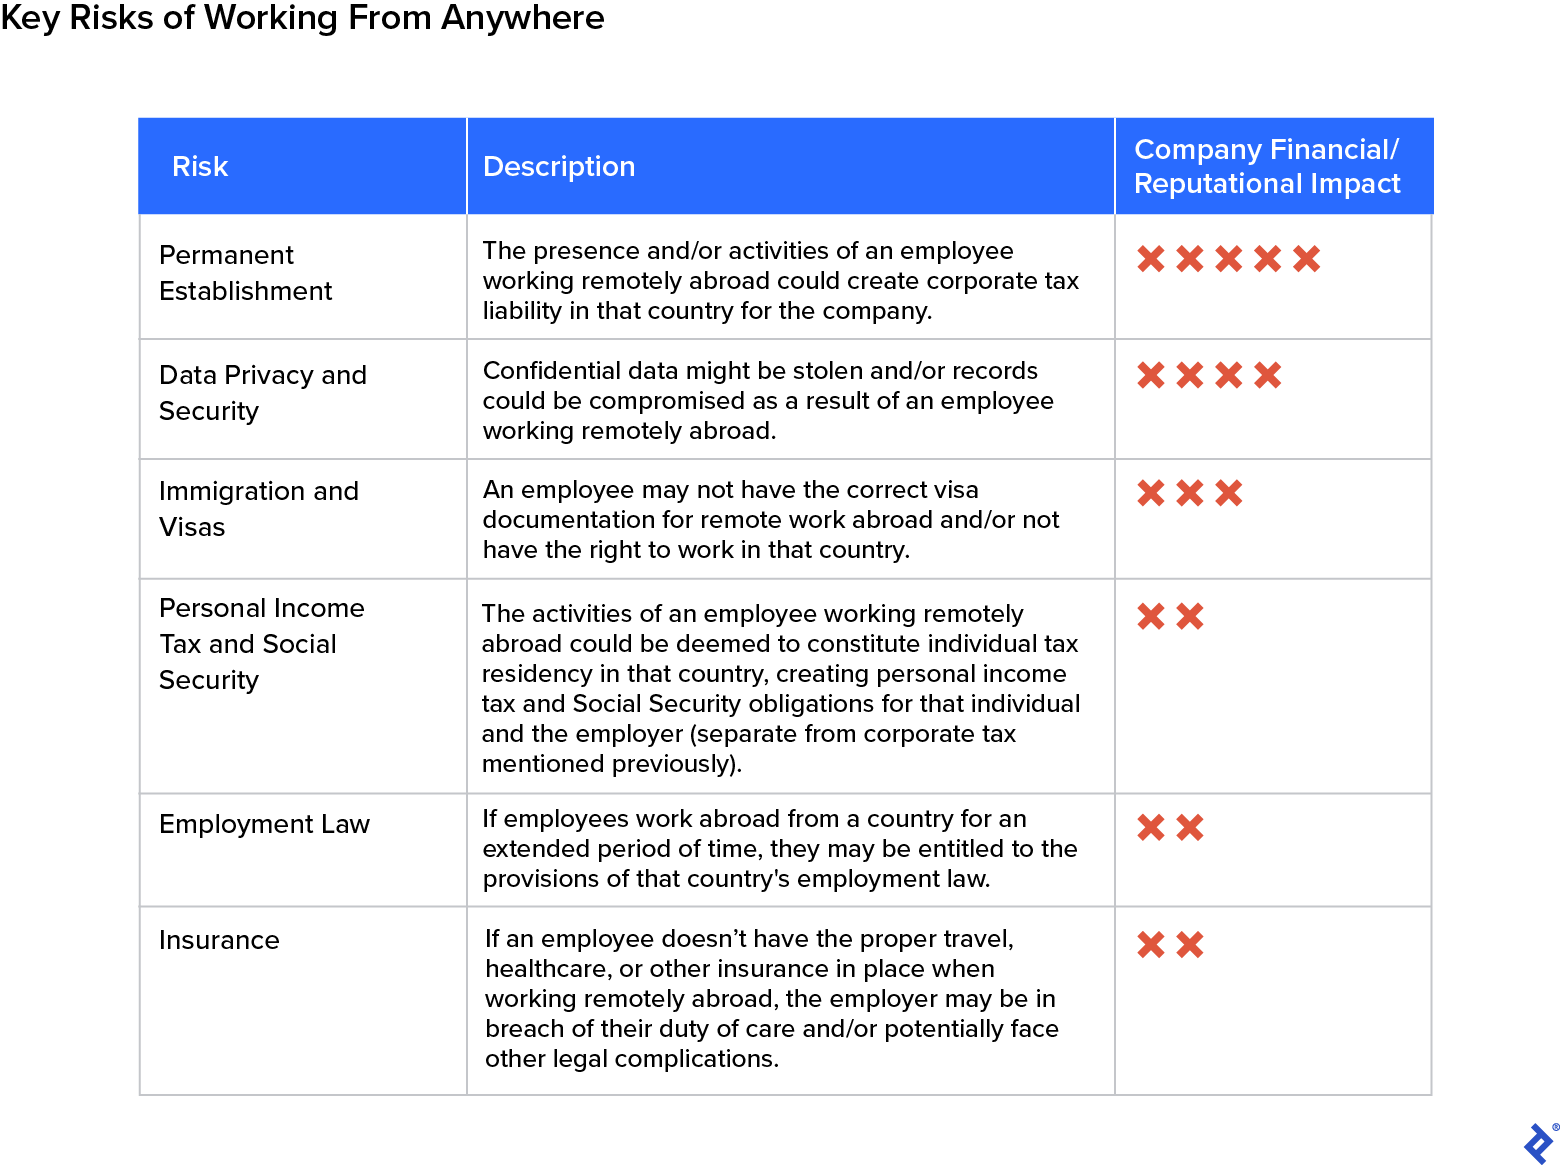 Table defining the six primary risks of Working From Anywhere in order of severity: permanent establishment, data privacy and security, immigration and visas, personal income tax and Social Security, employment law, and insurance.